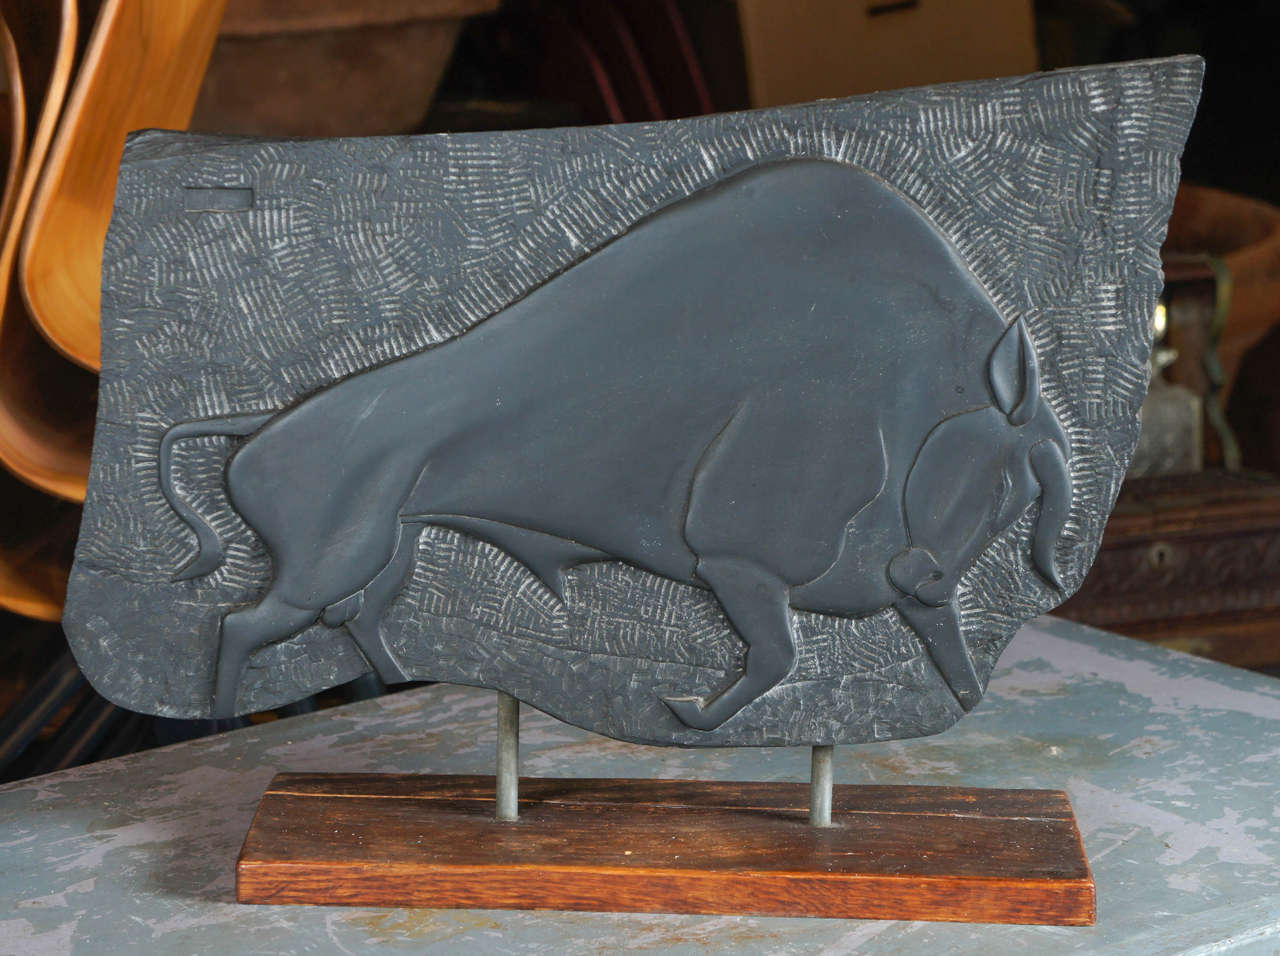 Slate stone carved bull by Williams, signed and mounted on original wood base. Beautifully carved on slate stone, probably around 1950, unique, signed upper left, Williams.